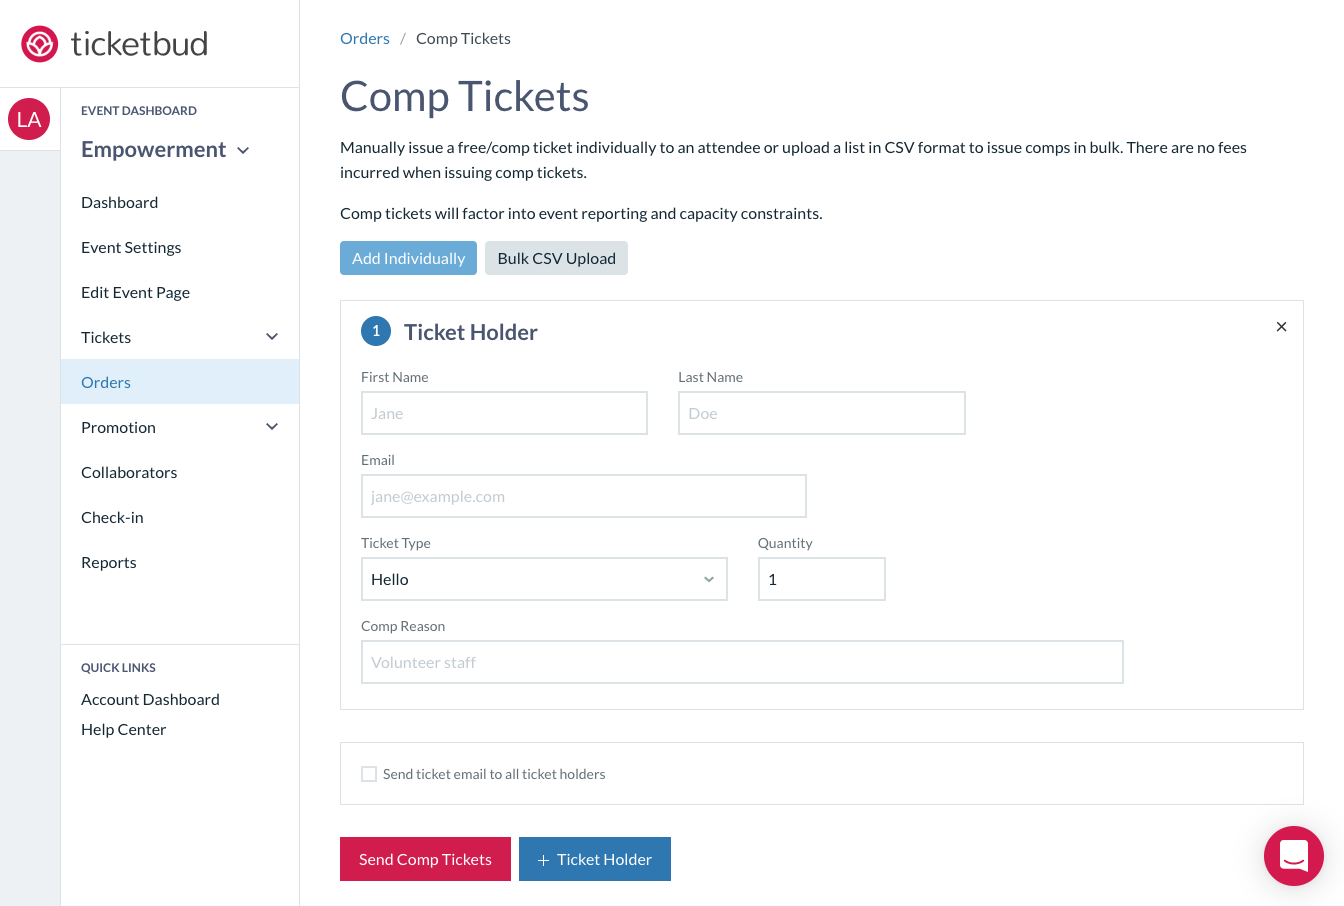 ticketbud.com_admin_events_2e9c4d0e-b2e1-11e9-b1f1-42010a717005_orders_comps_new.png